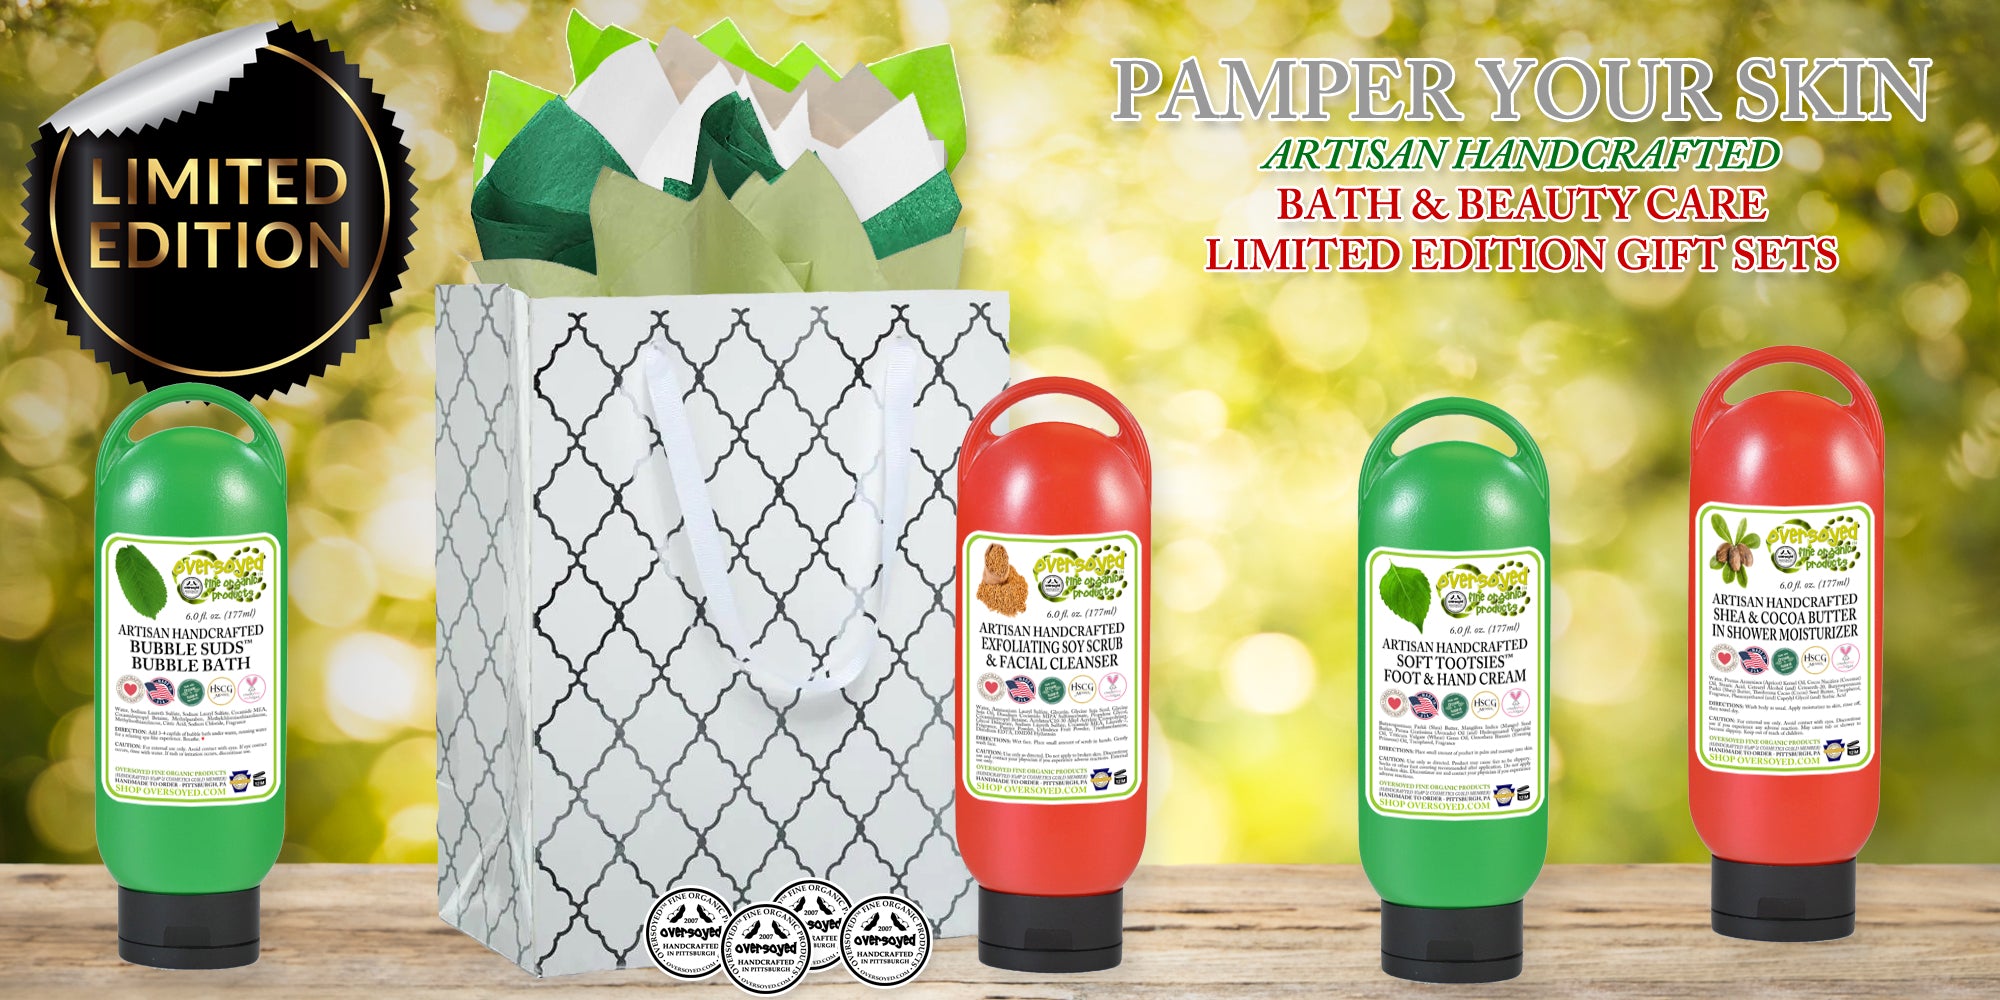 OverSoyed Artisan Handcrafted - Pamper Your Skin Artisan Handcrafted Bath & Beauty Gift Set